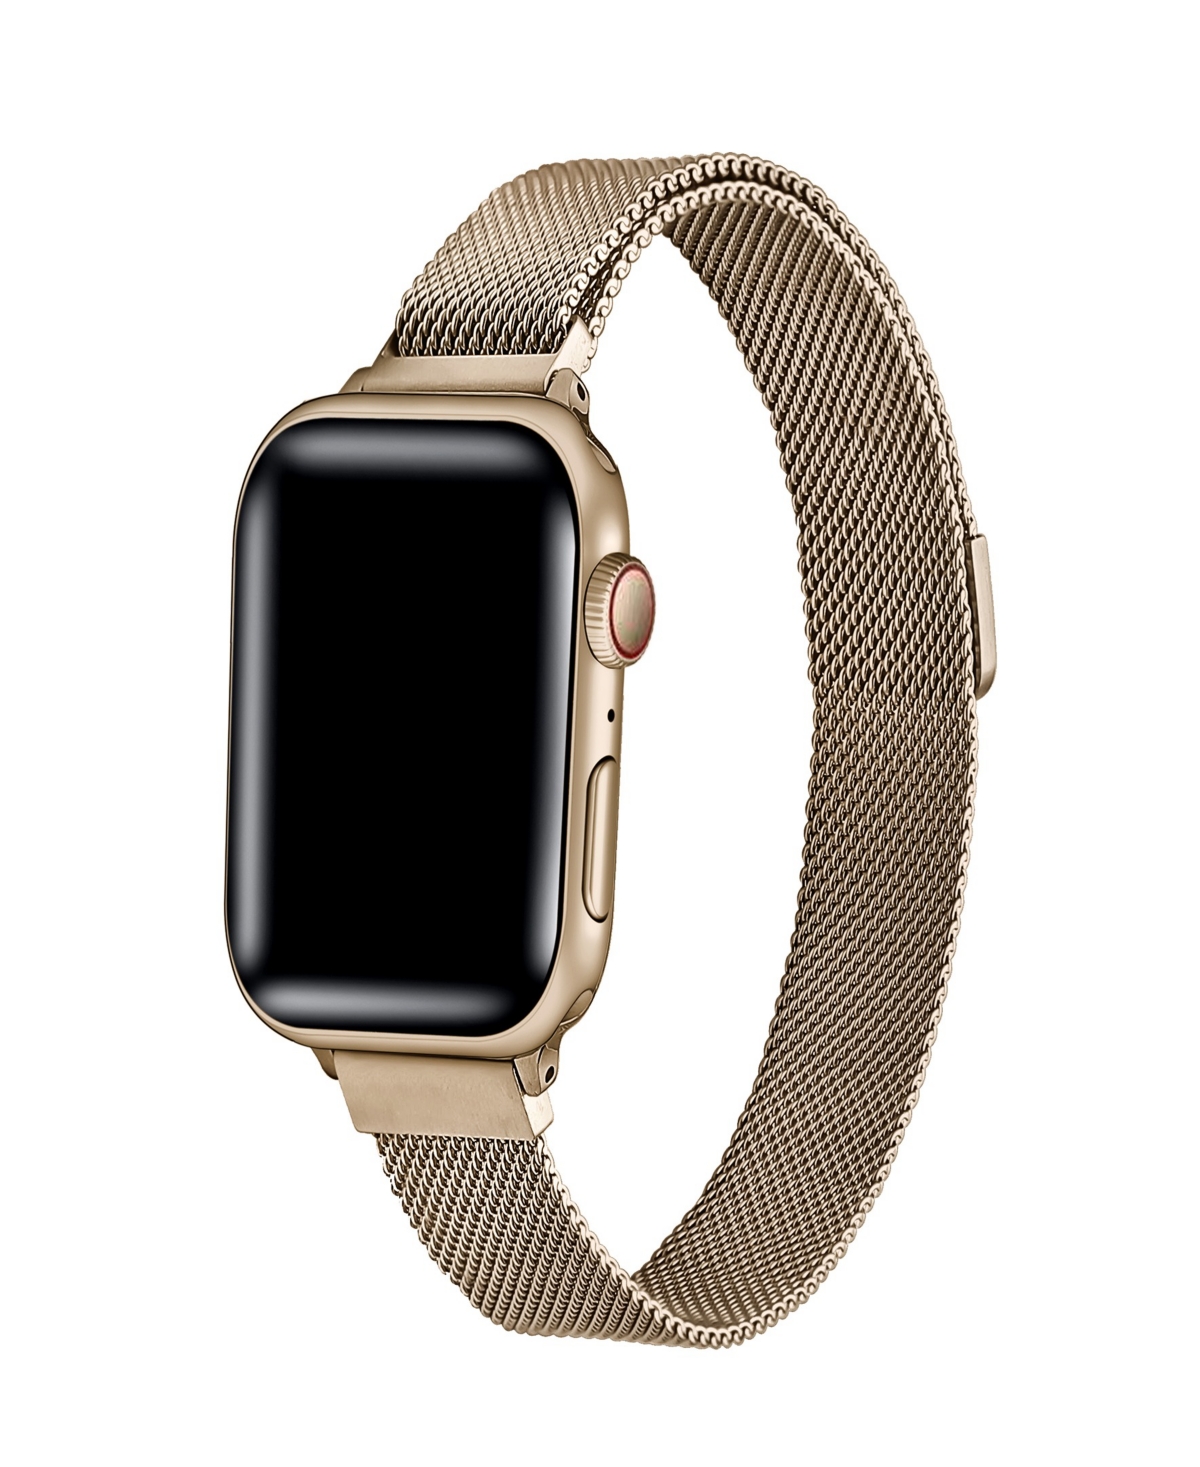 Unisex Infinity Stainless Steel Mesh Band for Apple Watch Size- 38mm, 40mm, 41mm - New Gold